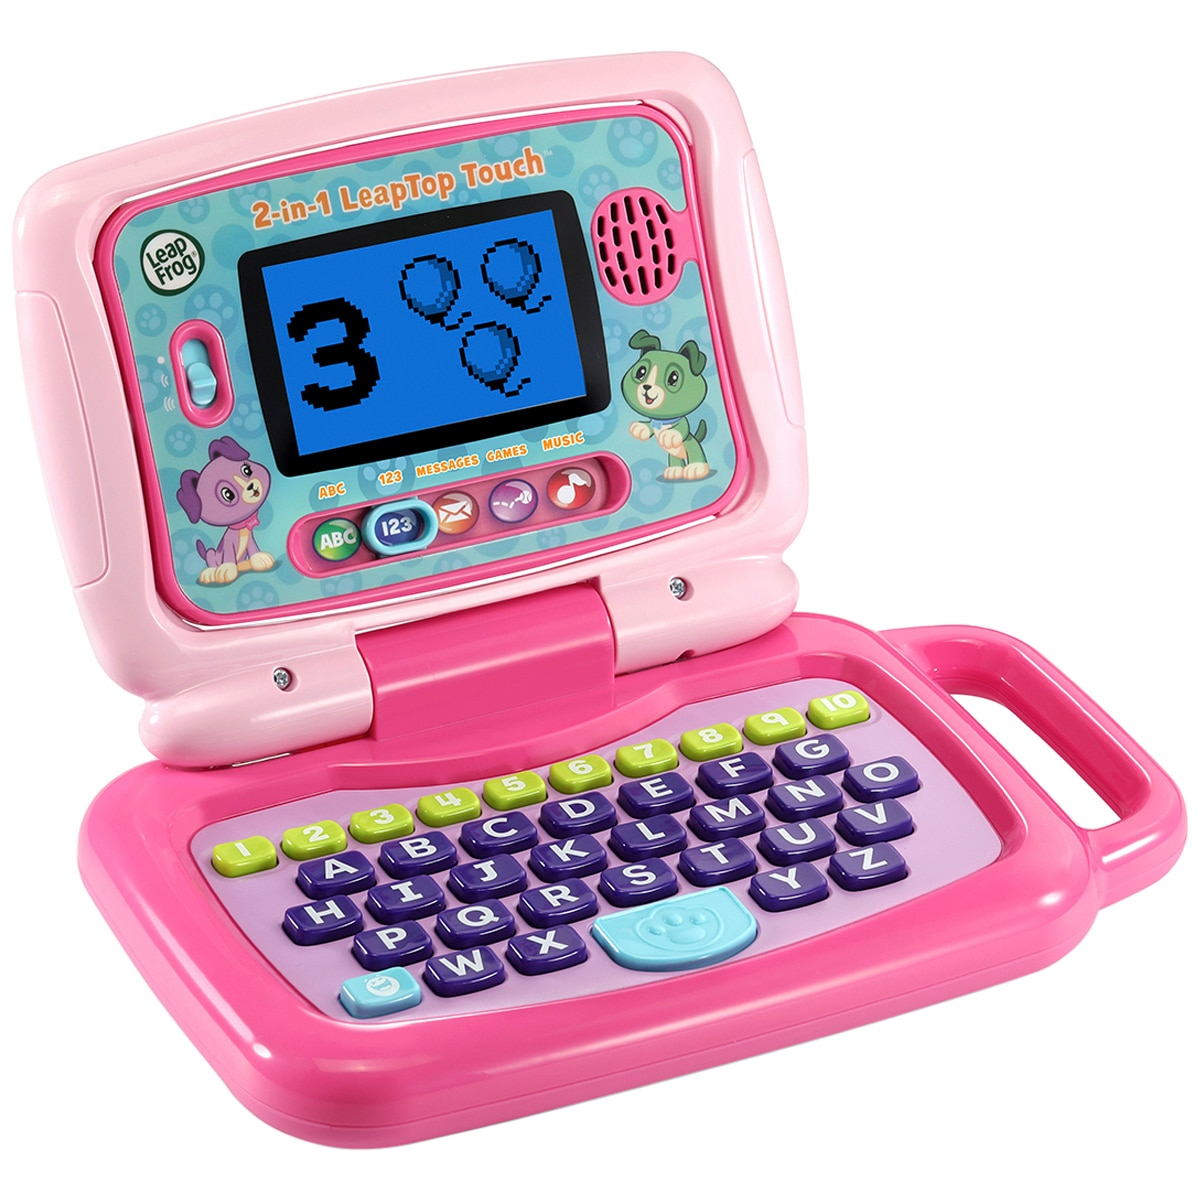 Leapfrog 2 in 1 My LeapTop Touch Laptop Pink 600953